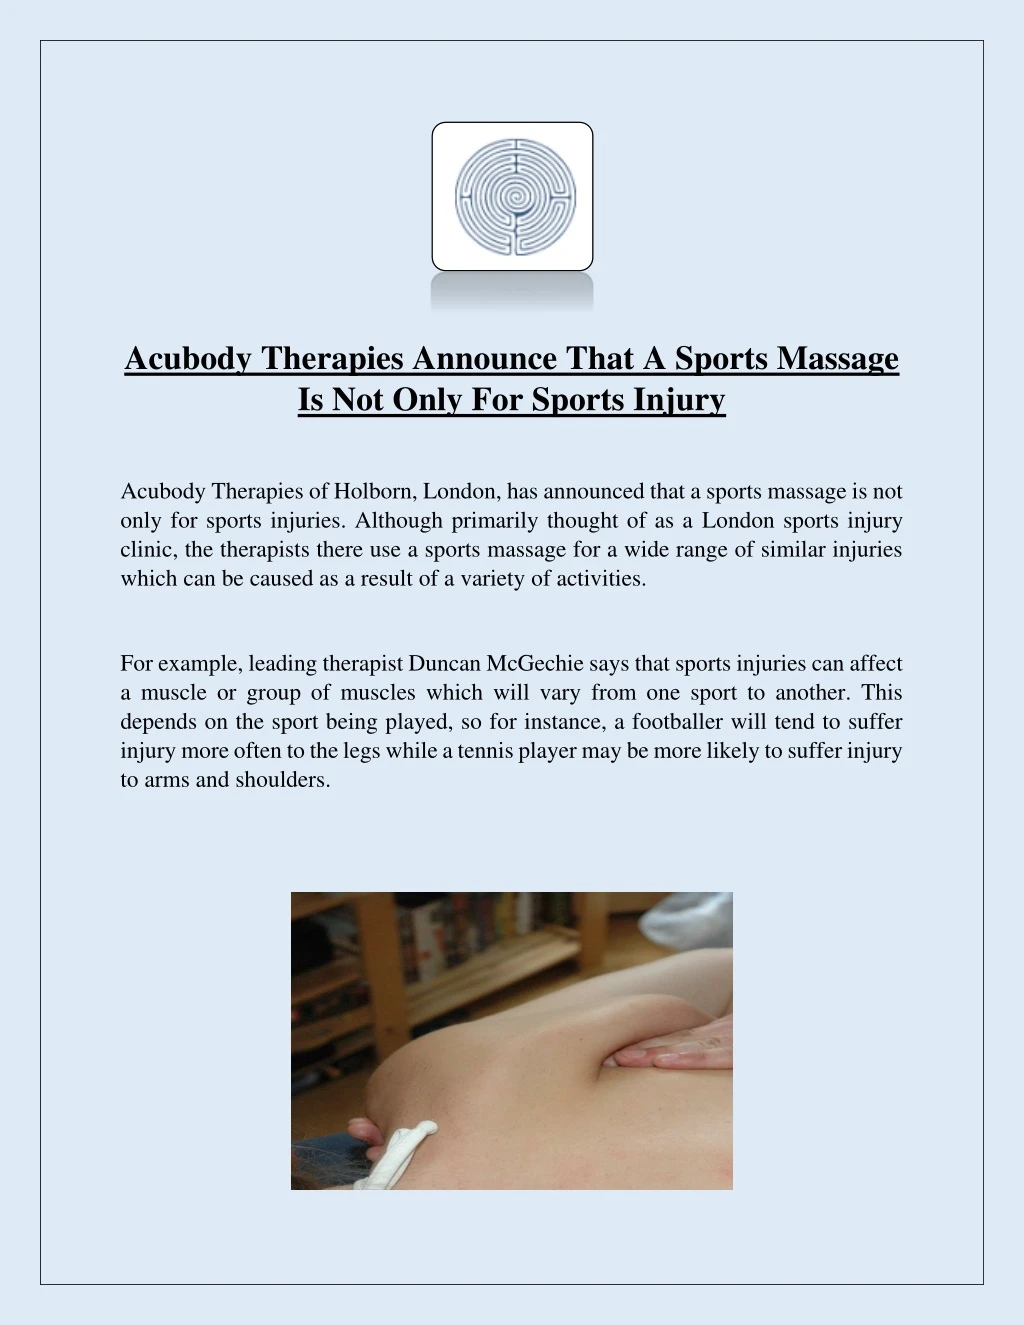 acubody therapies announce that a sports massage